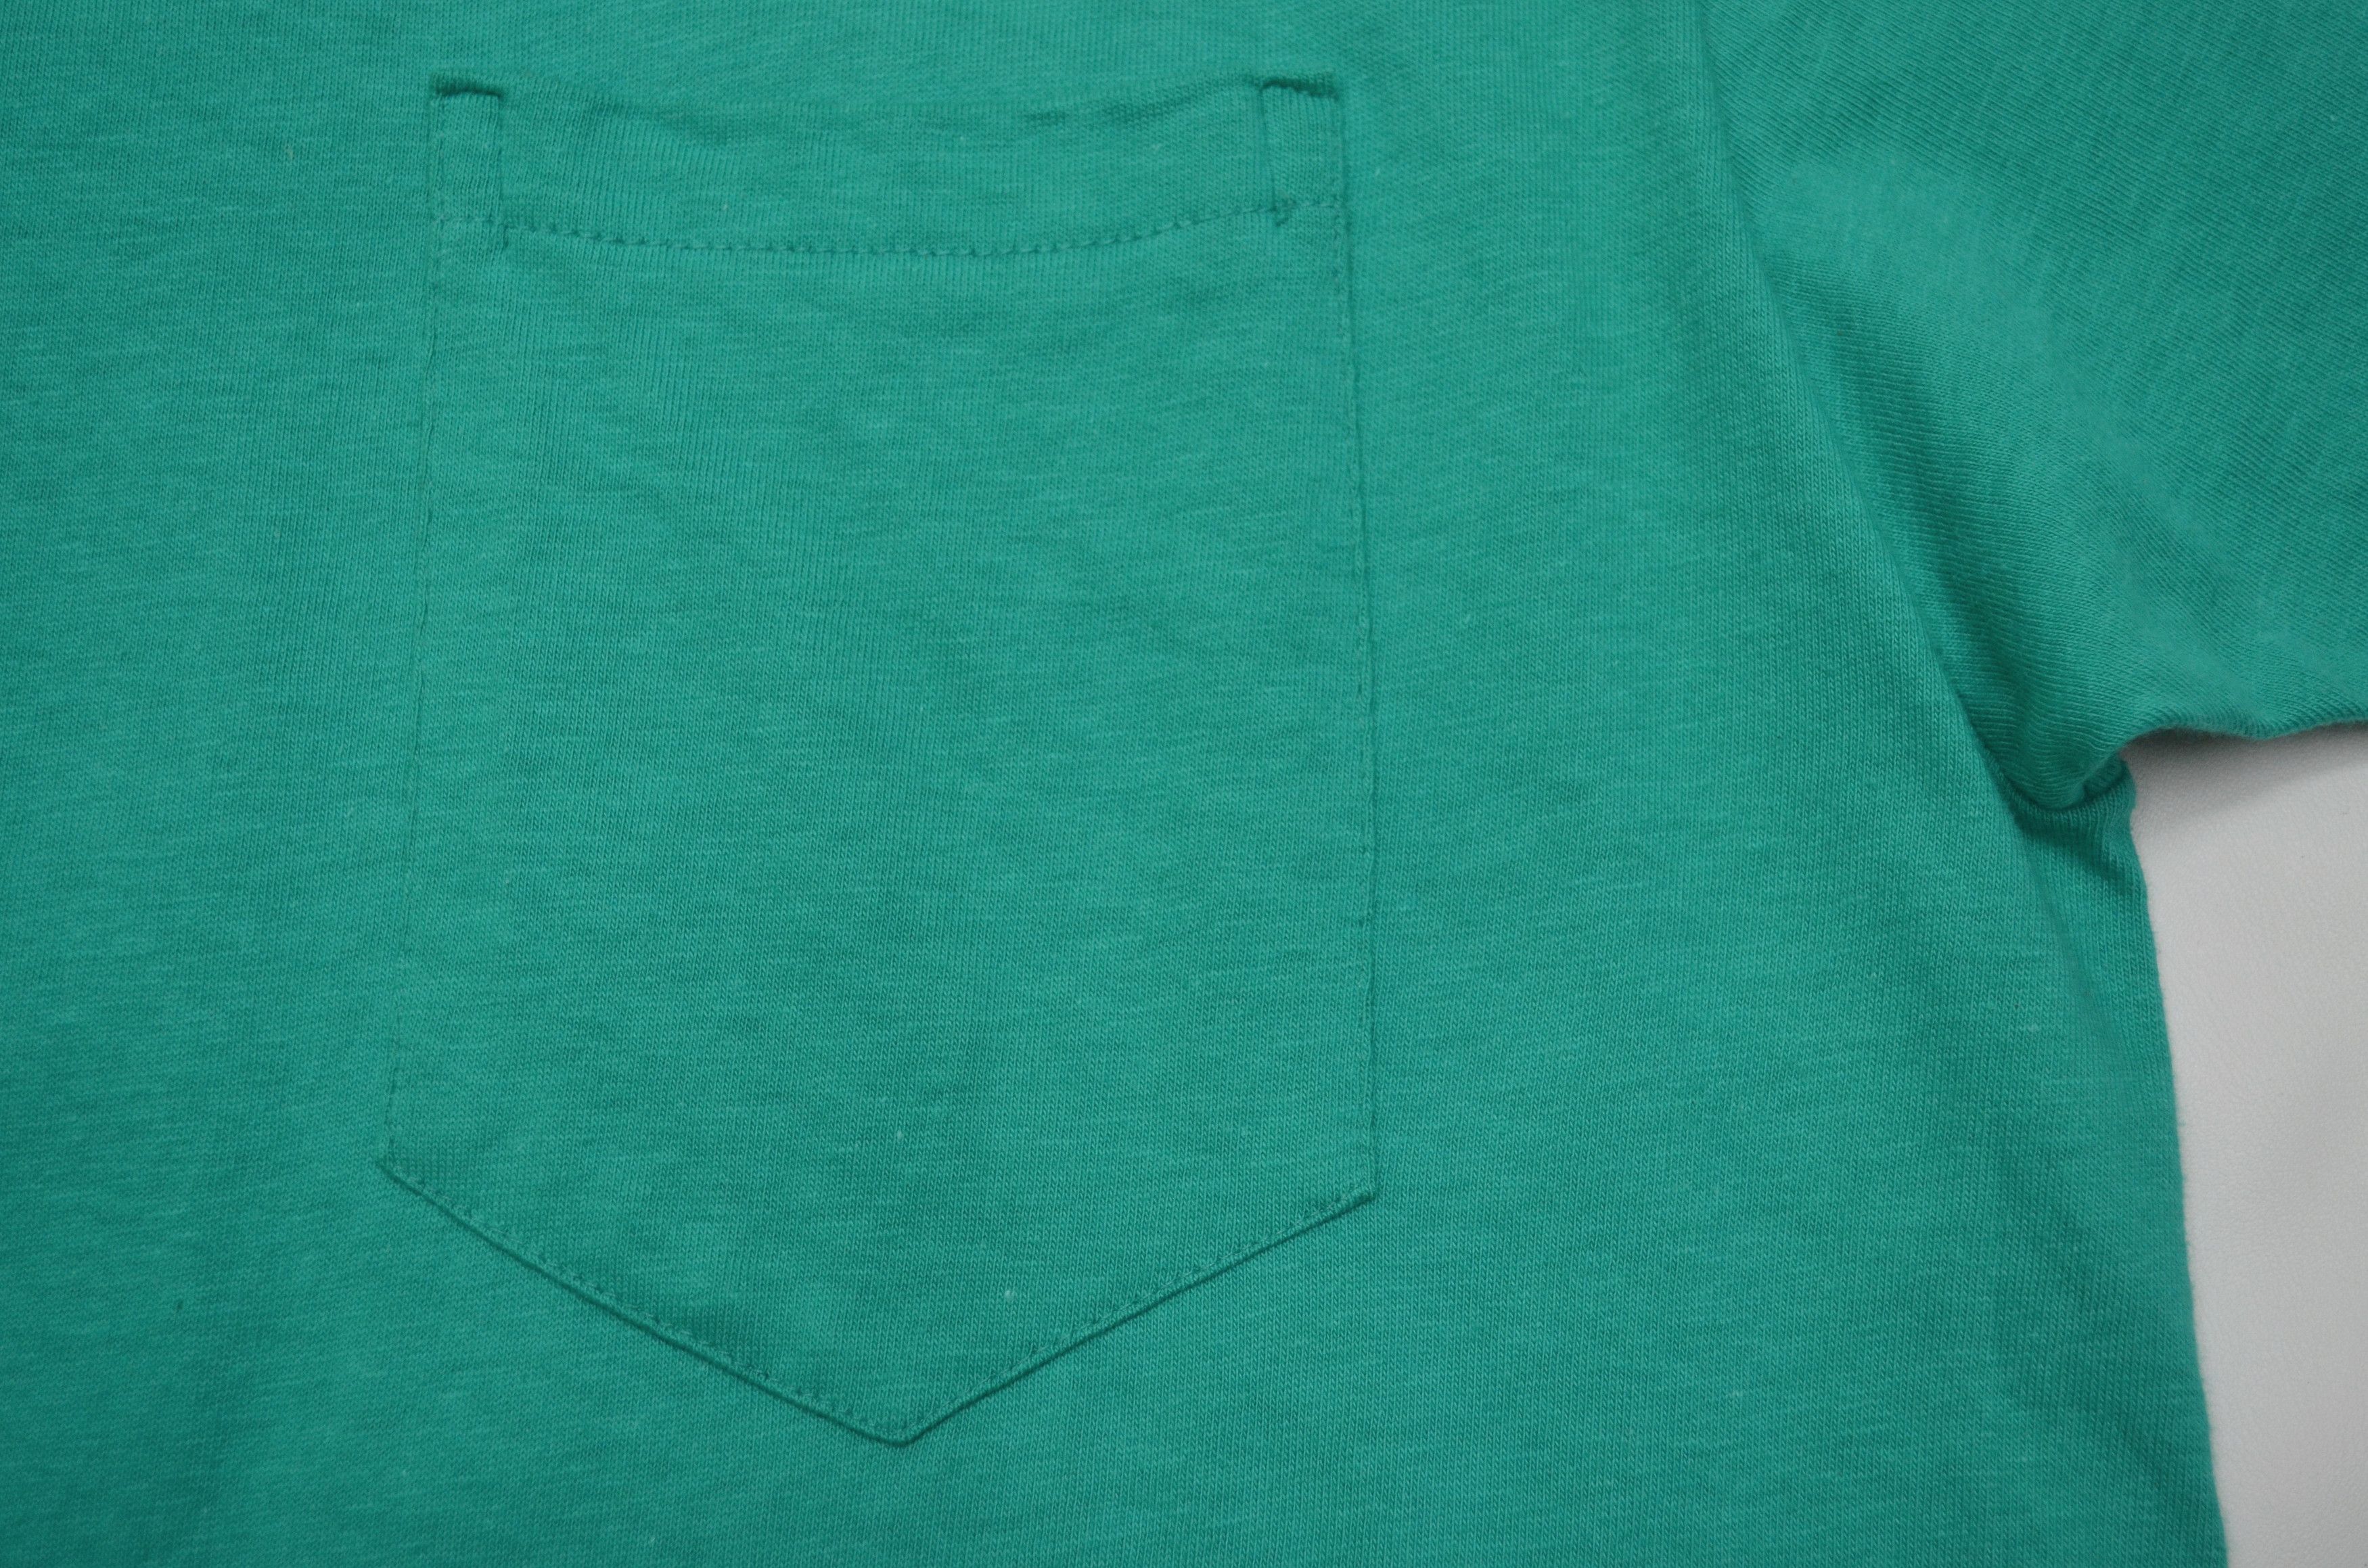 Vintage 90s JCPenney Royal Comfort Blank Pocket Tee Made In USA Size US L / EU 52-54 / 3 - 5 Thumbnail